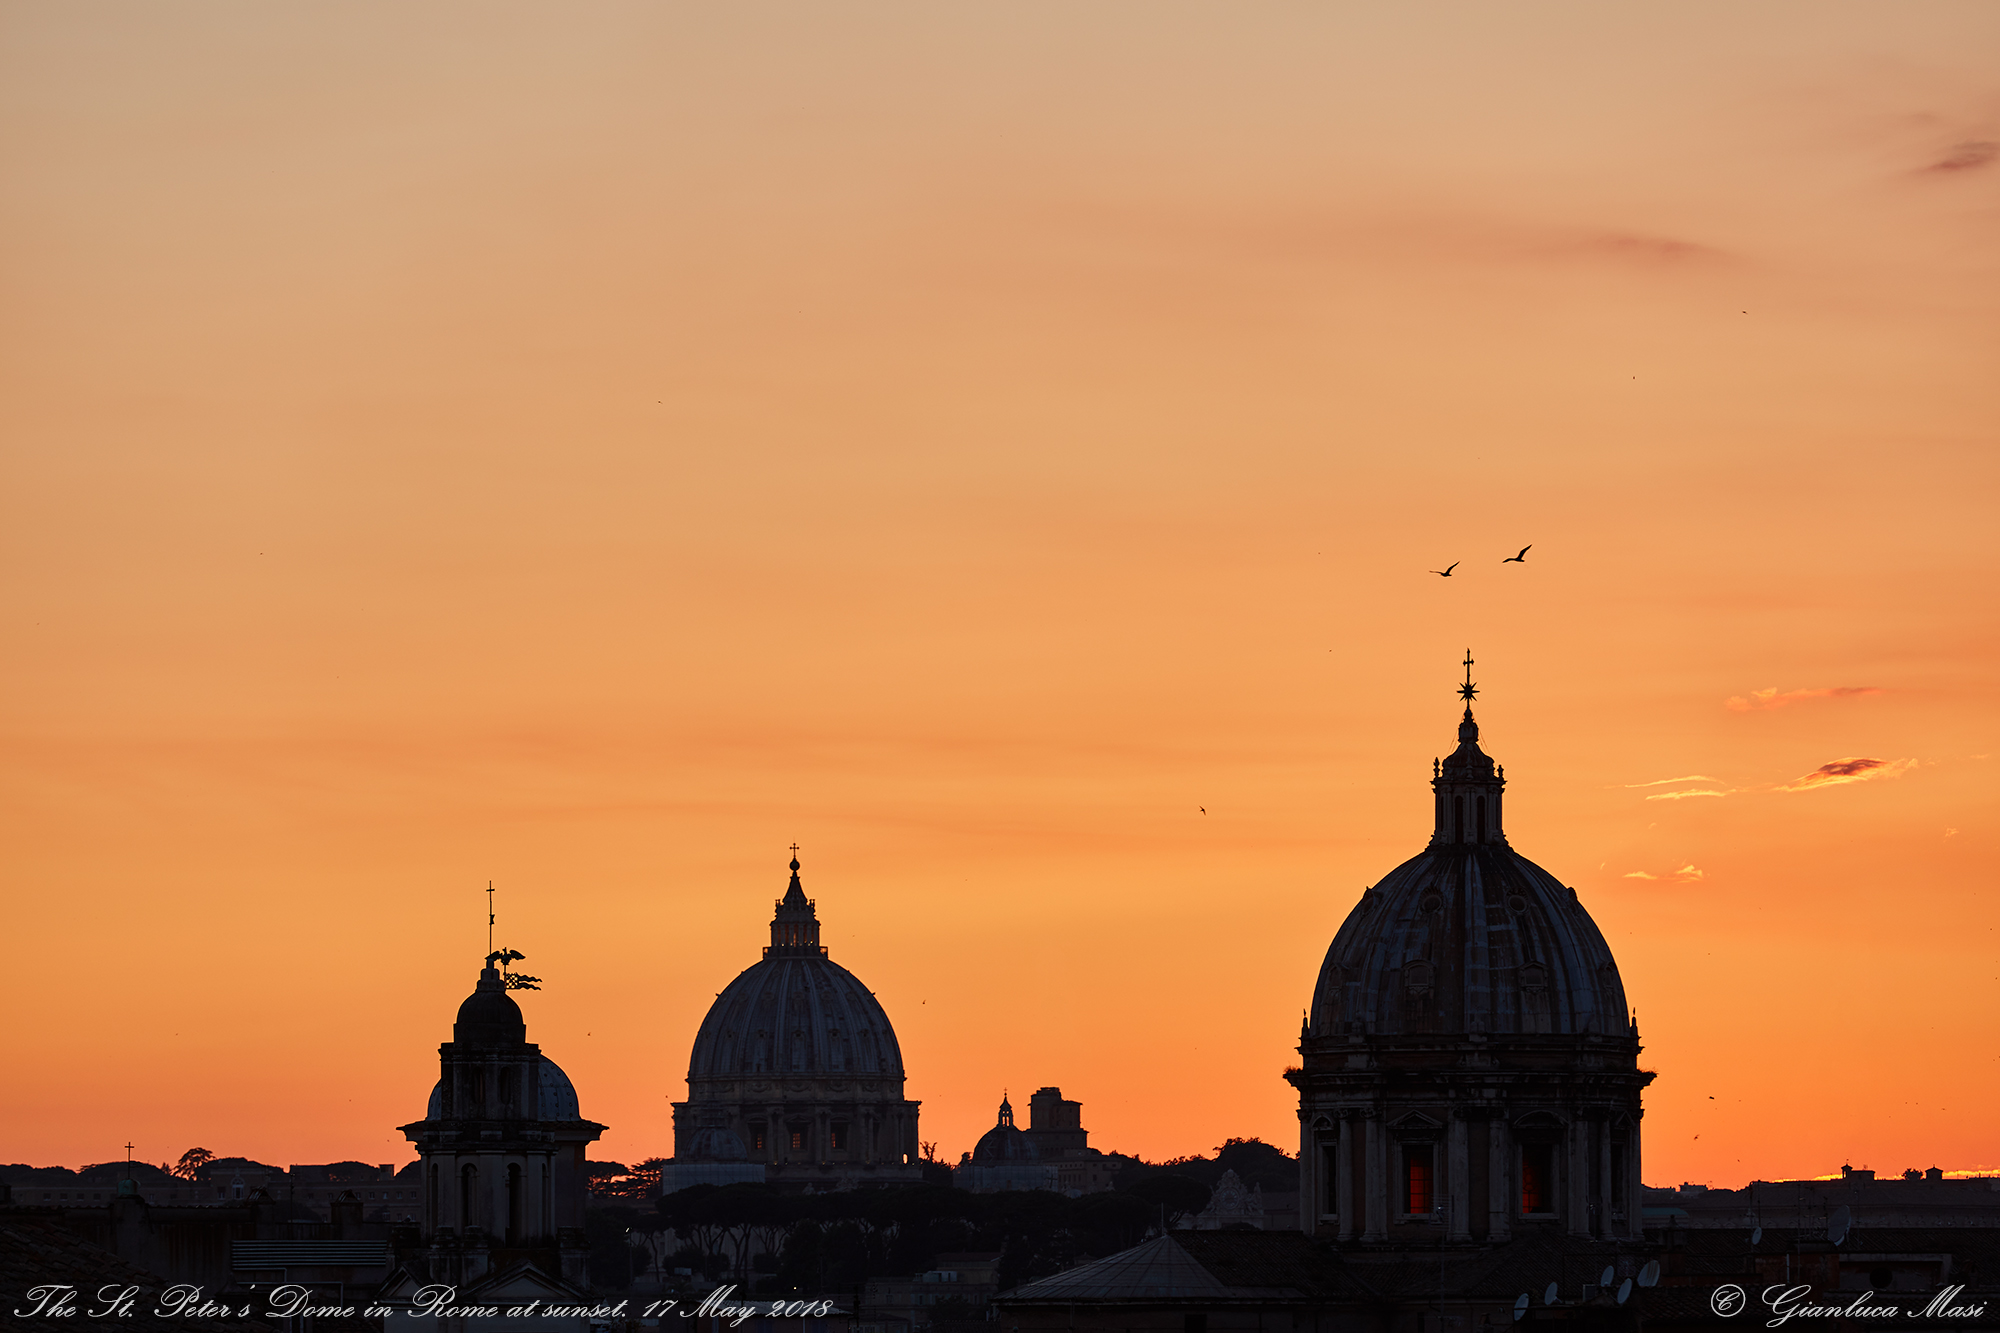 St. Peter's Dome at sunset. 17 May 2018.